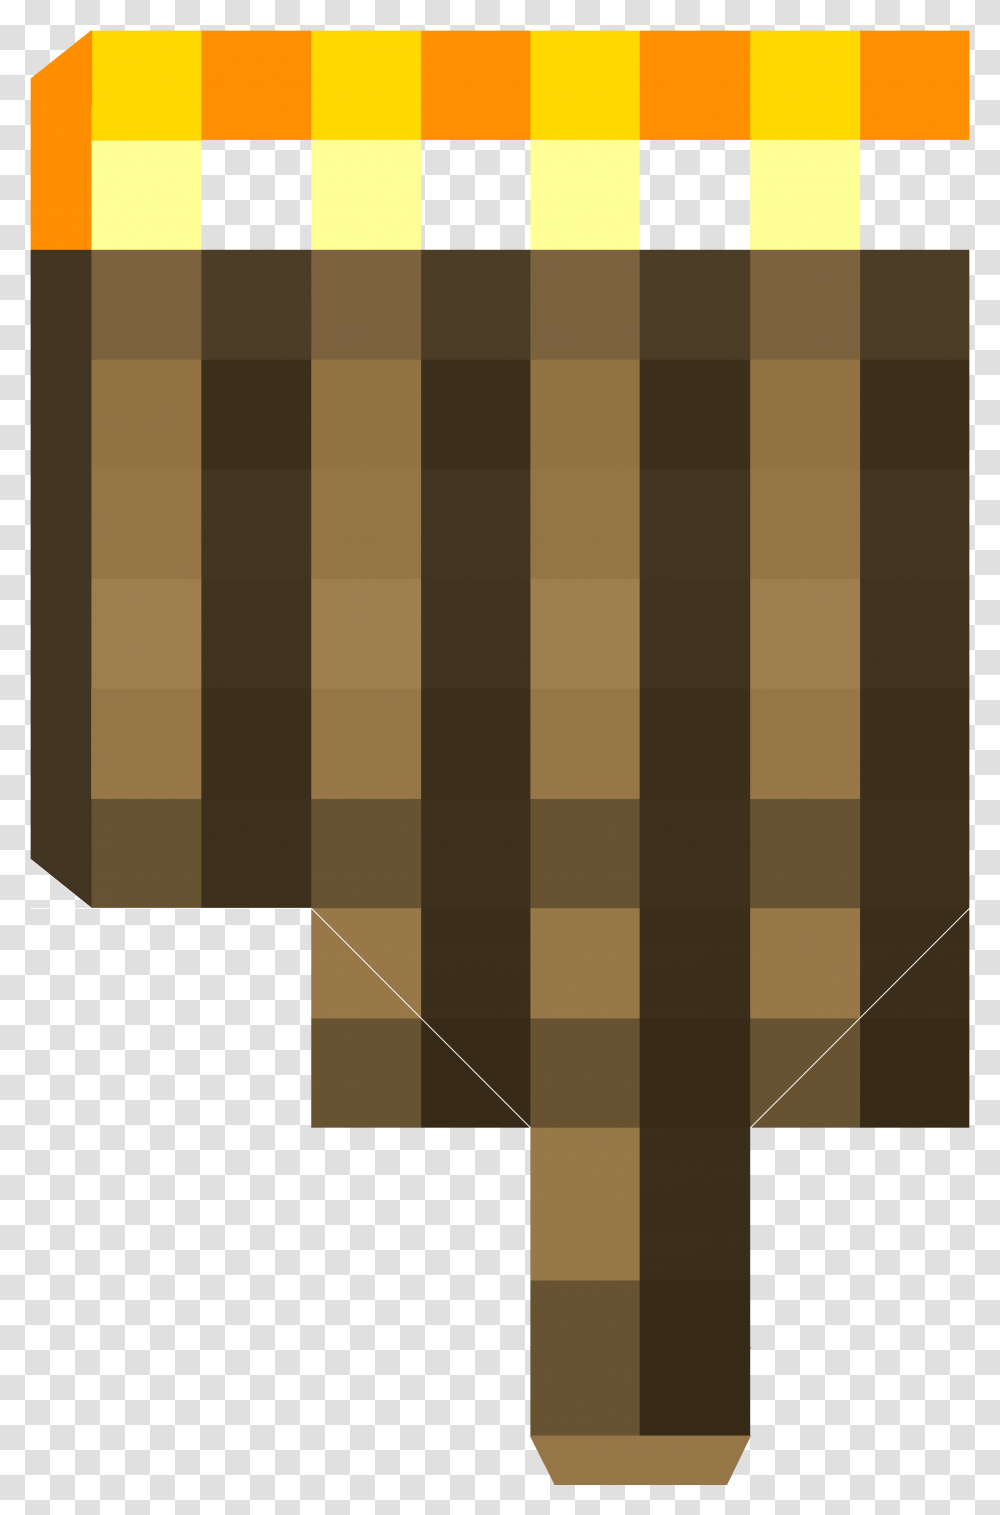 Minecraft Block Cut Out, Texture, Outdoors, Rug, Home Decor Transparent Png